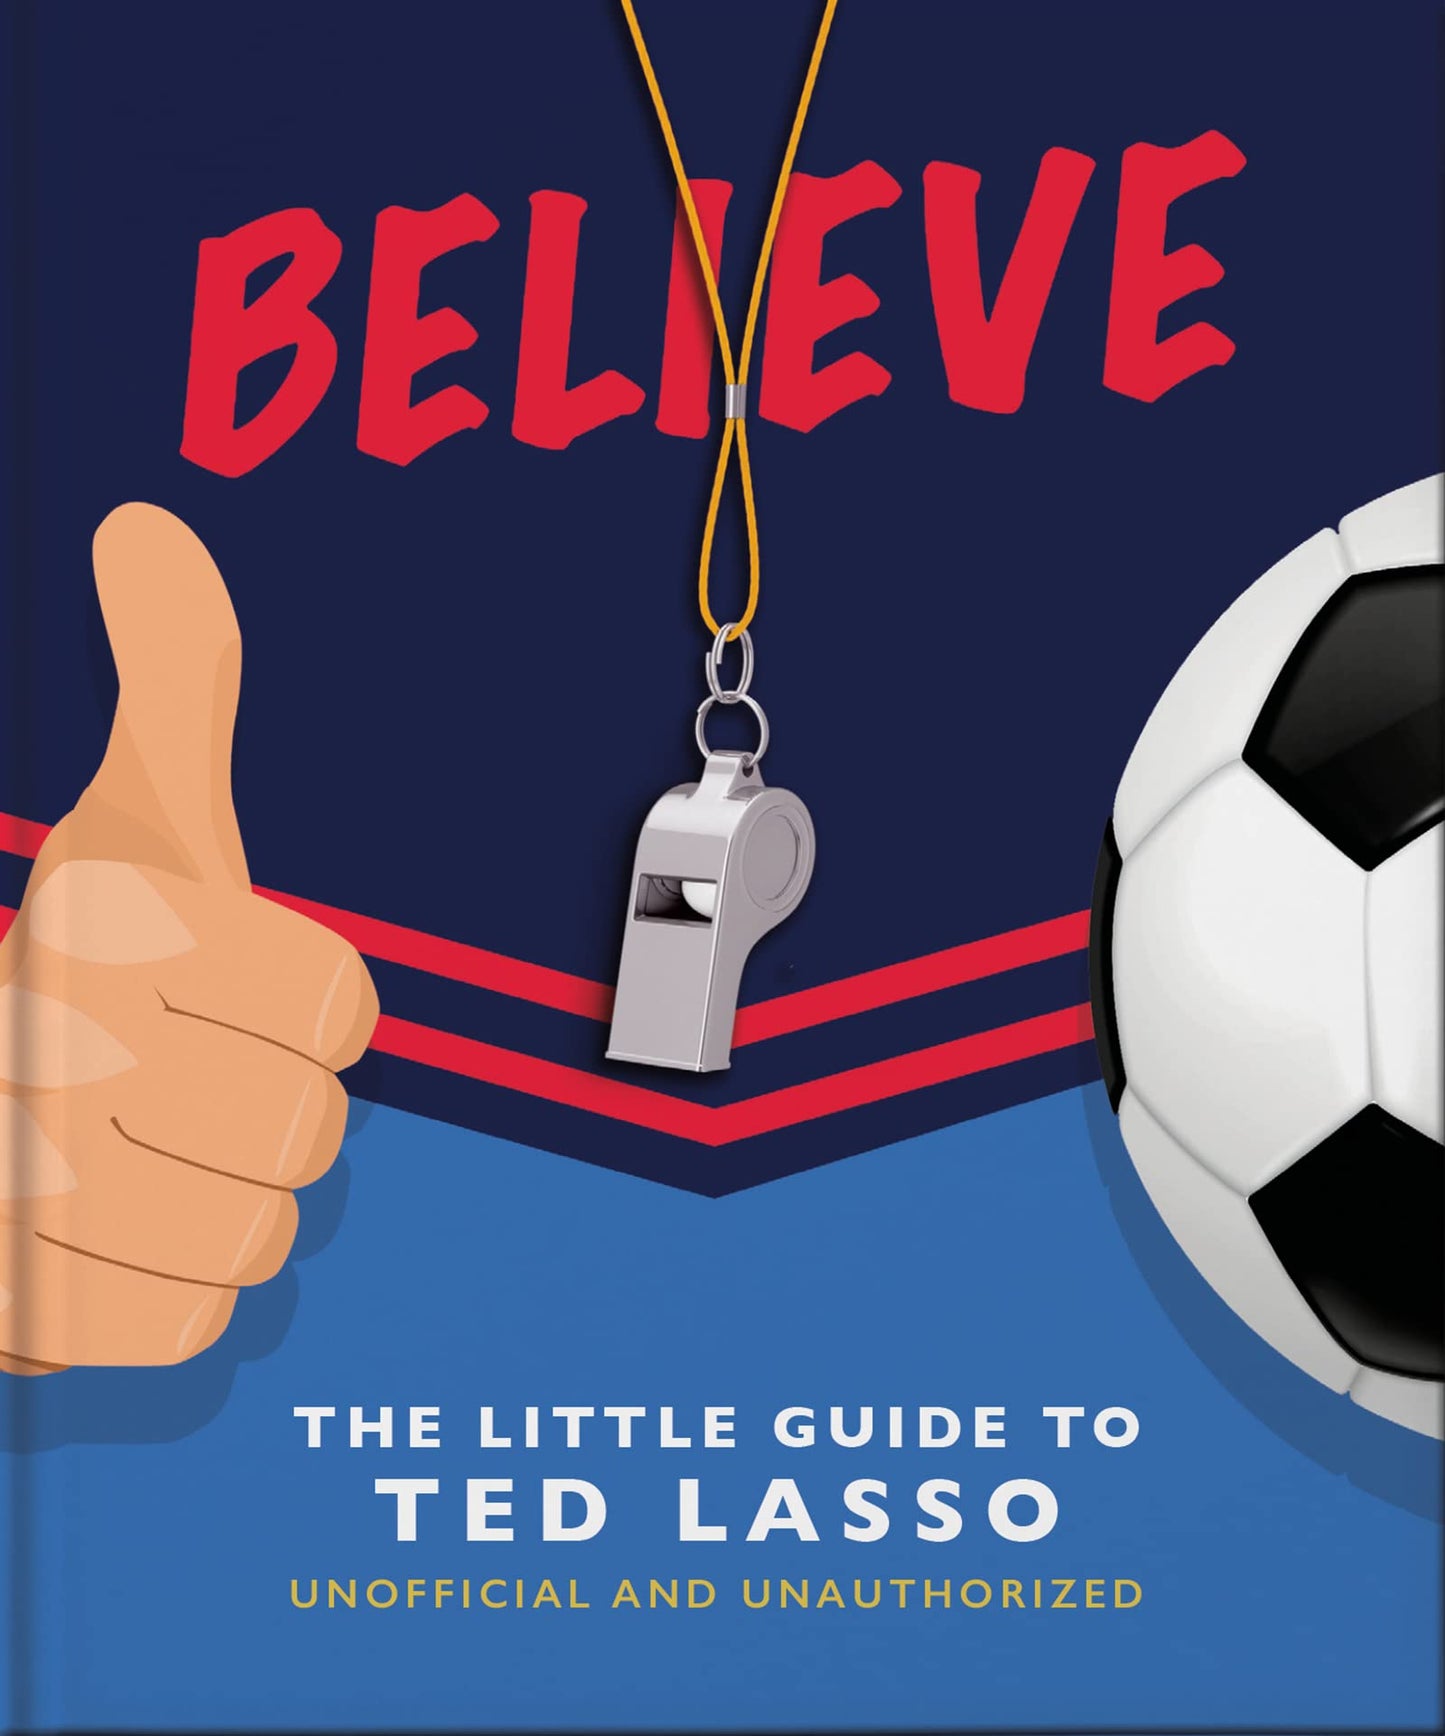 front cover of book has chest view of someone giving a thumbs up while holding a soccer ball and a whistle around their neck, title of book in red